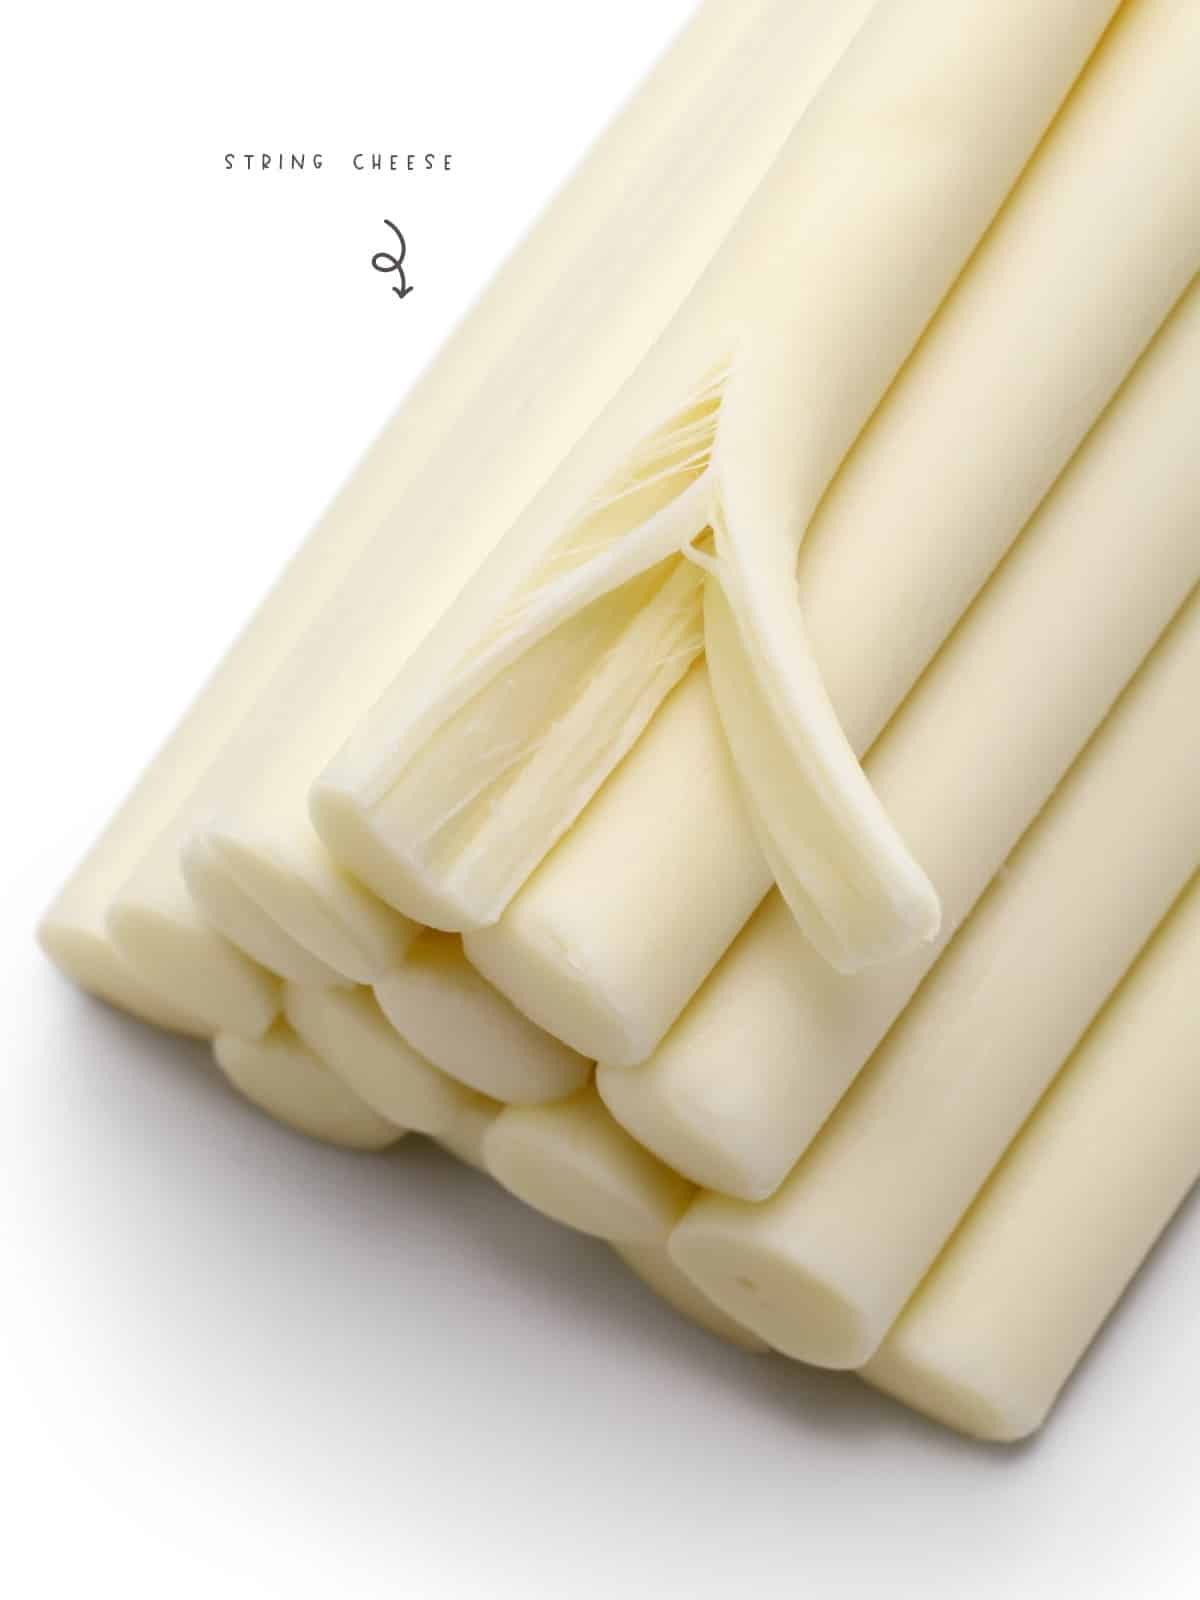 If you're a fan of string cheese, you'll be glad to know that you can freeze it and enjoy it later. Just make sure to thaw it out before eating it, otherwise you'll be in for a mouthful of freezer burn.